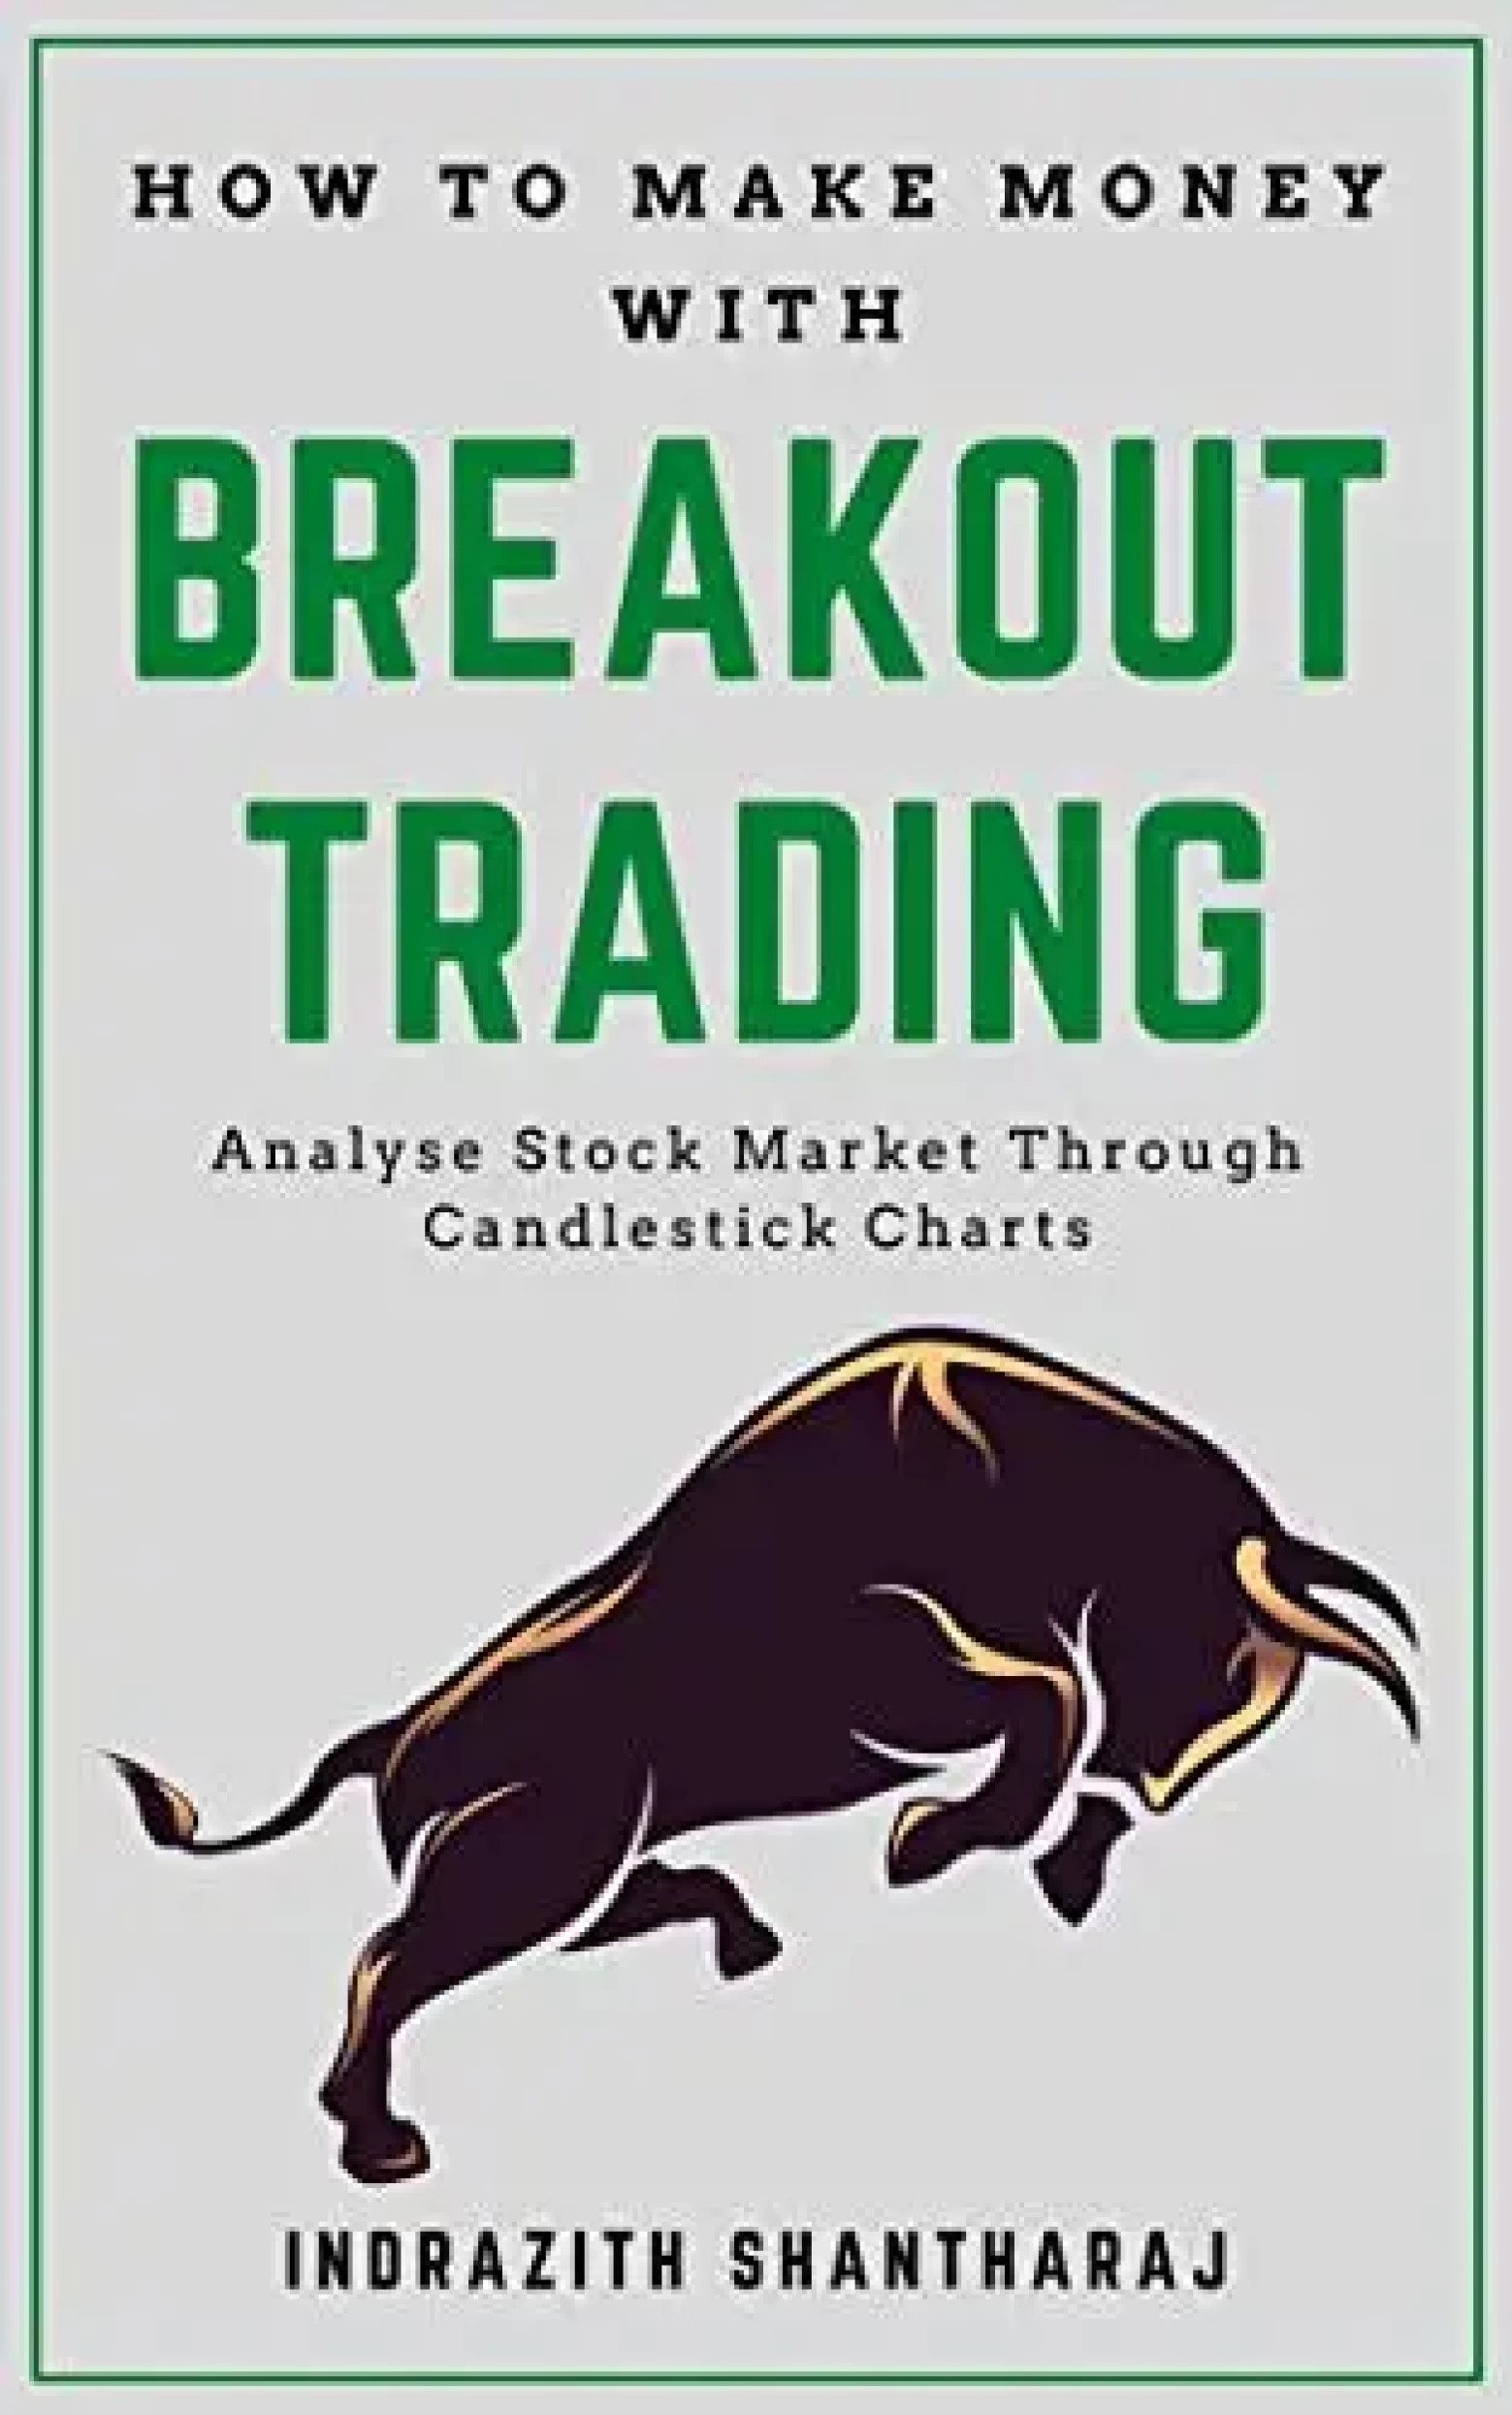 How to Make Money With Breakout Trading (Paperback) - Indrazith Shantharaj